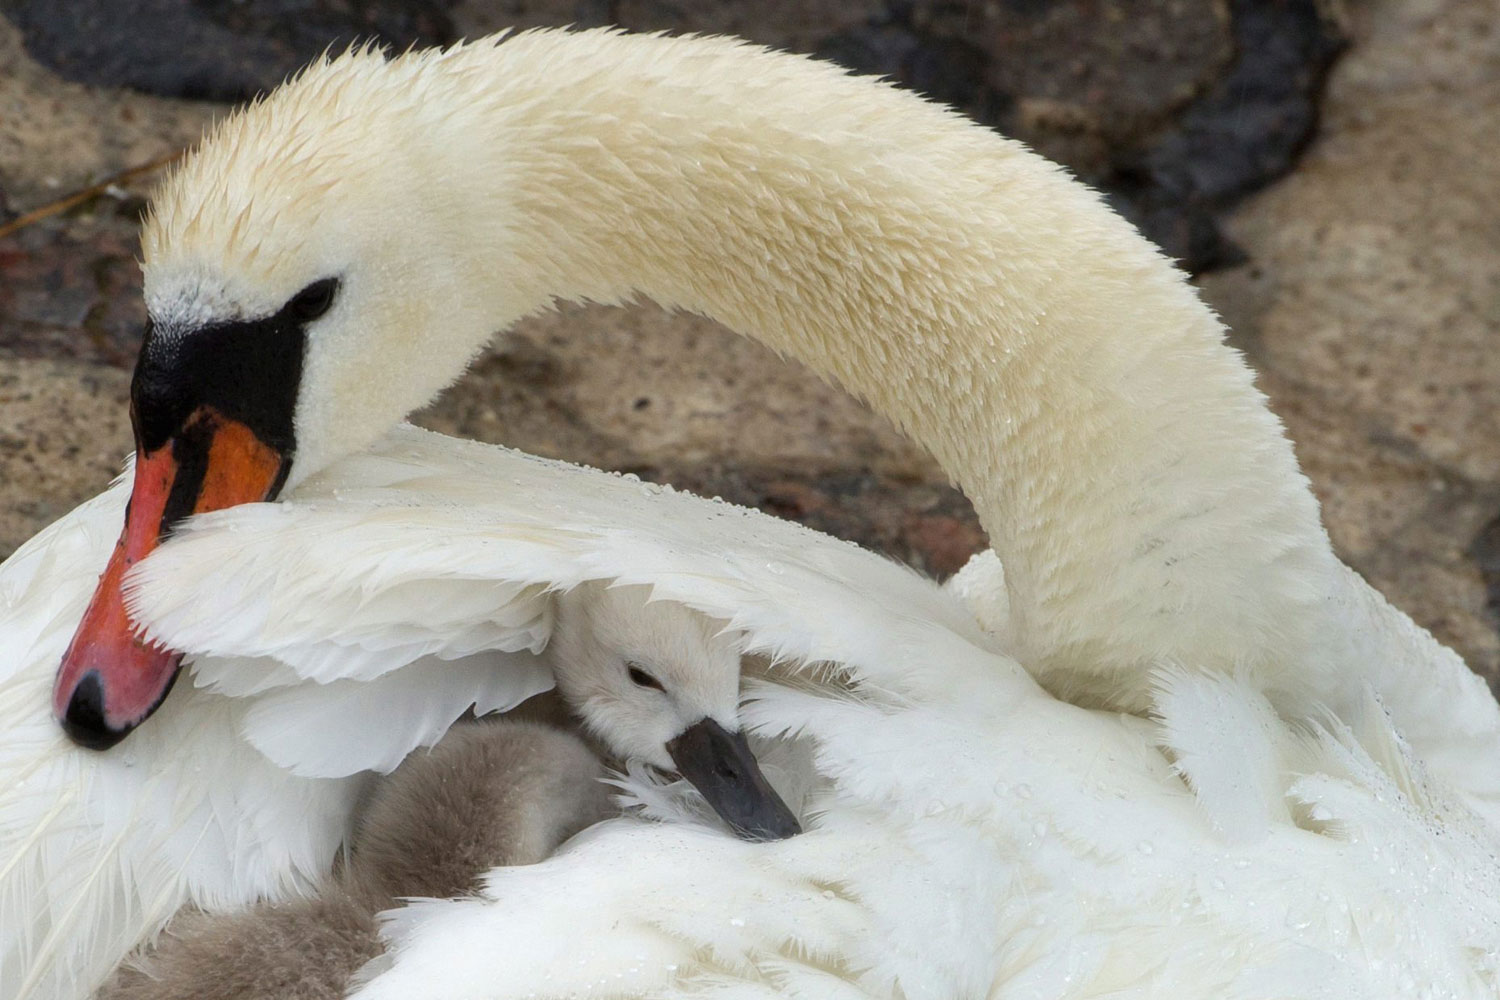 A young swan snuggles to its mother in Stralsund, Germany, July 2, 2011.